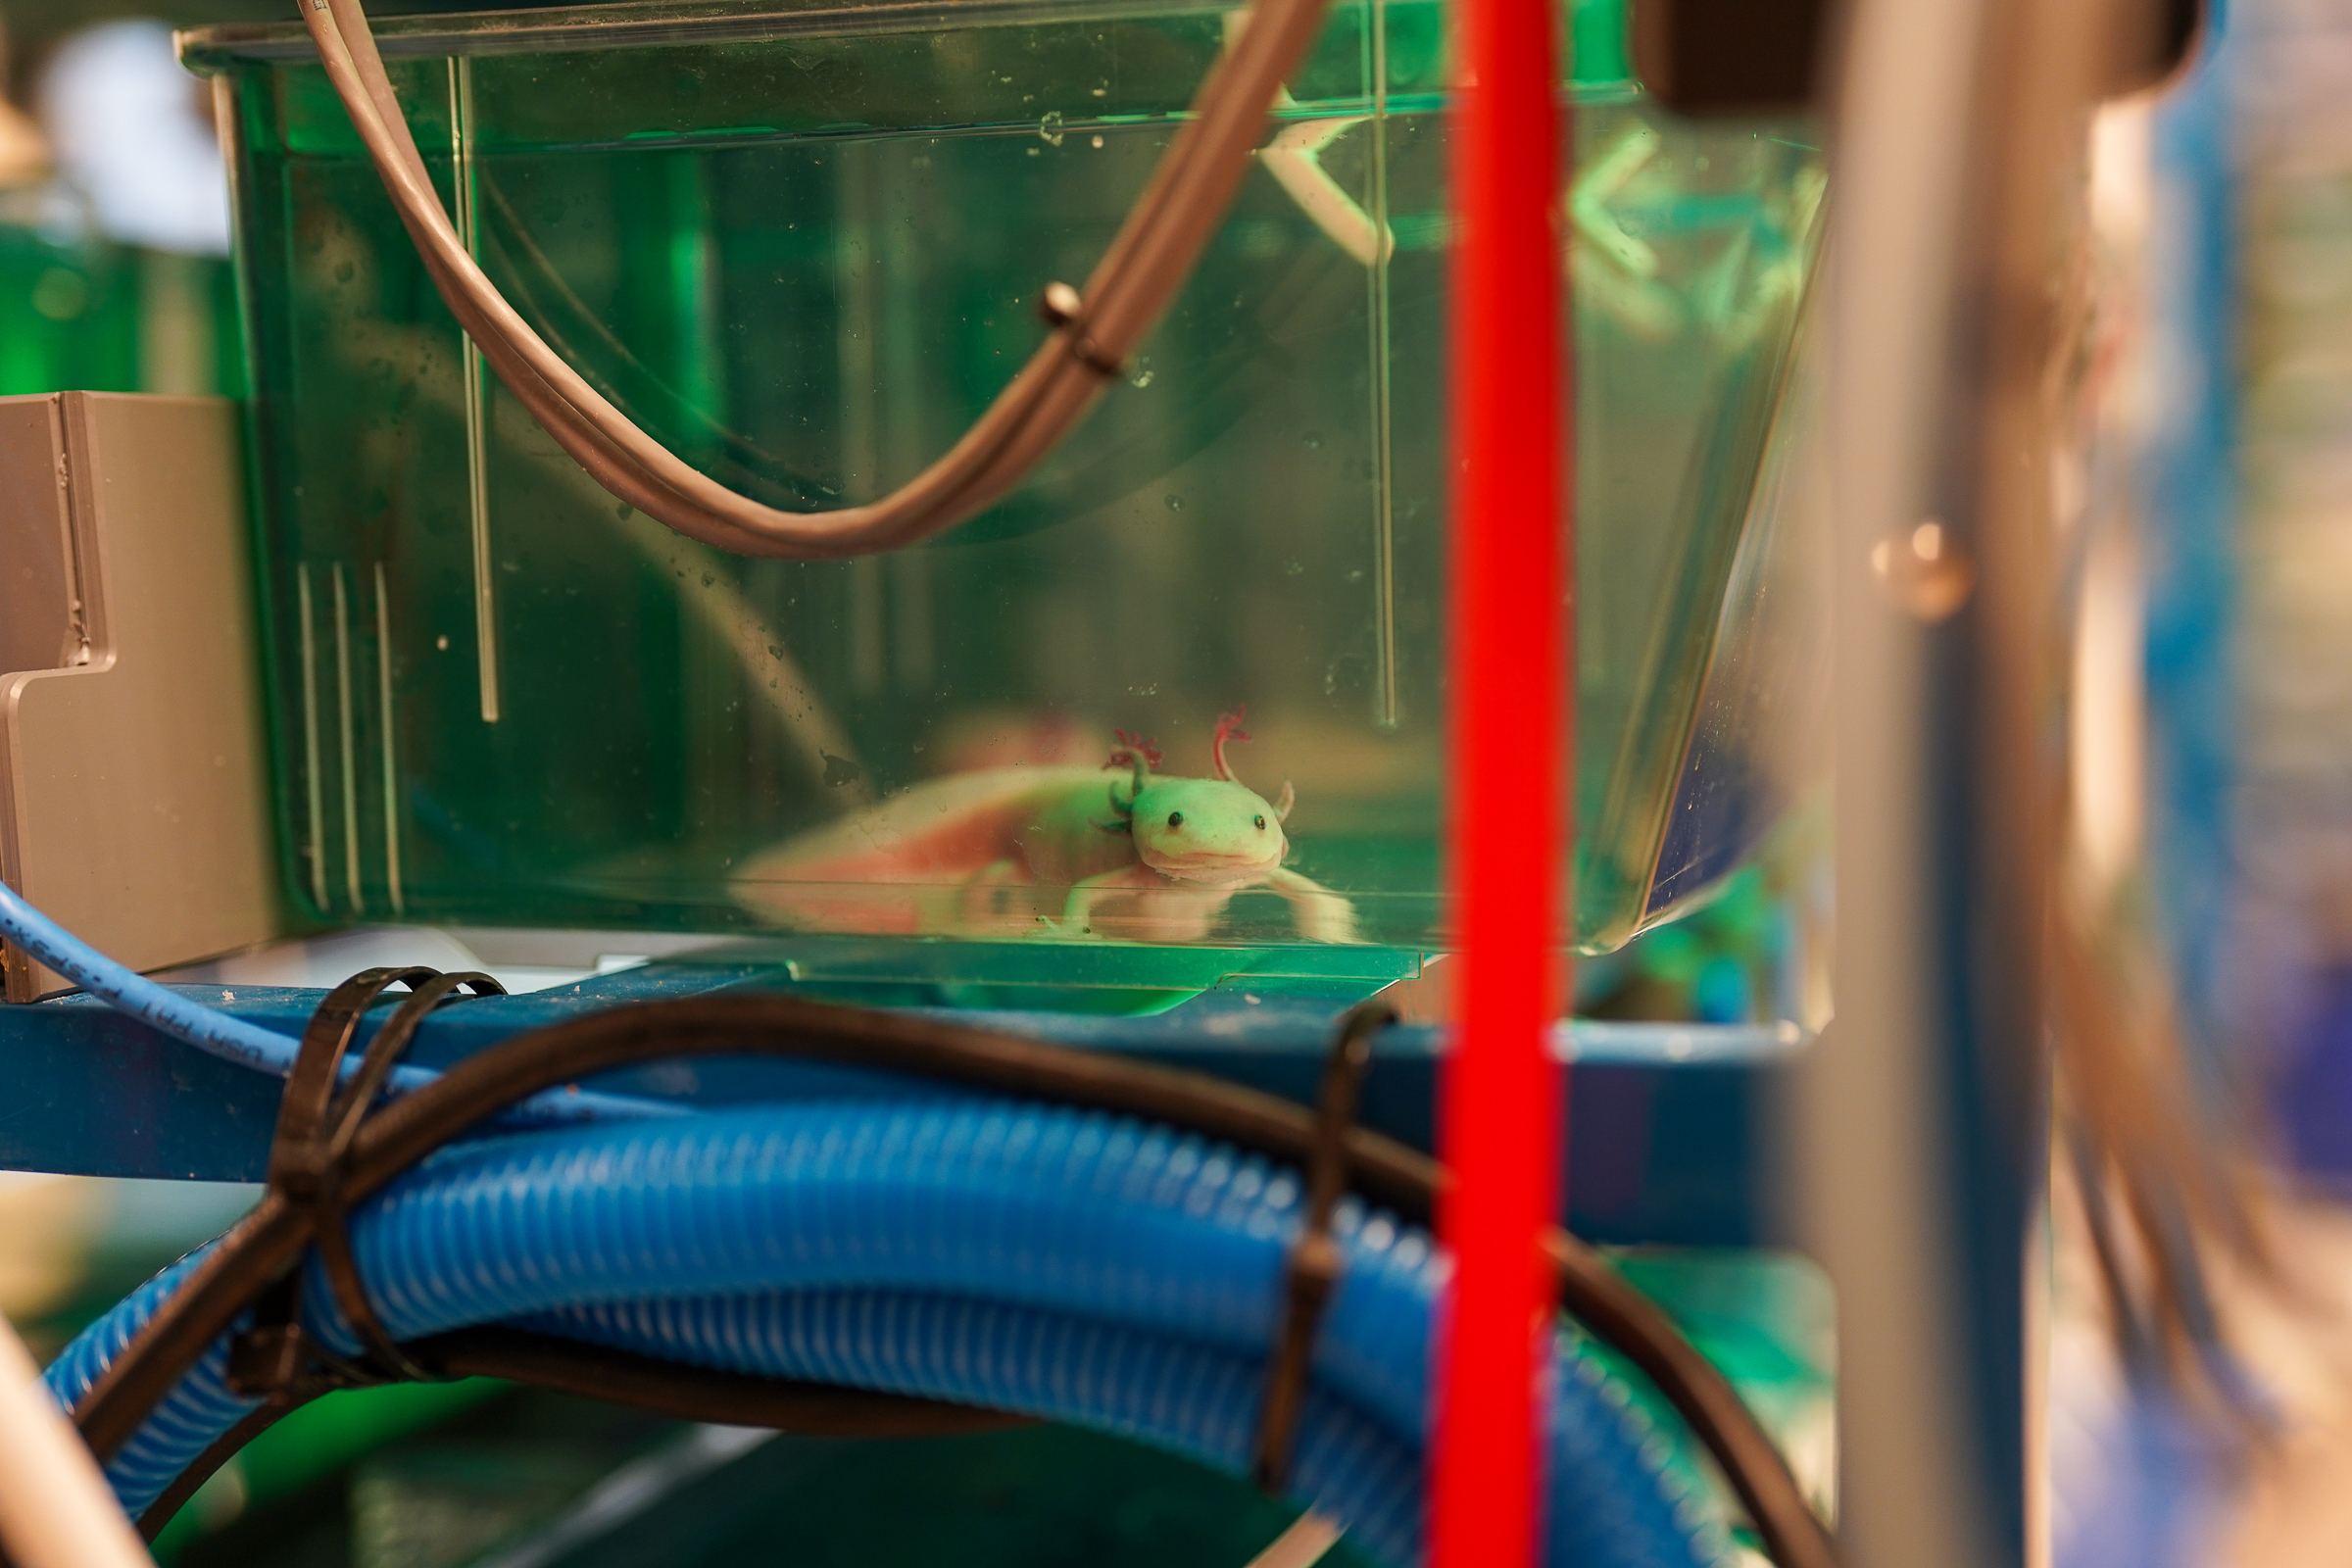 An axolotl in a tank in the Echeverri Lab at the MBL. Credit: Cristian Selden